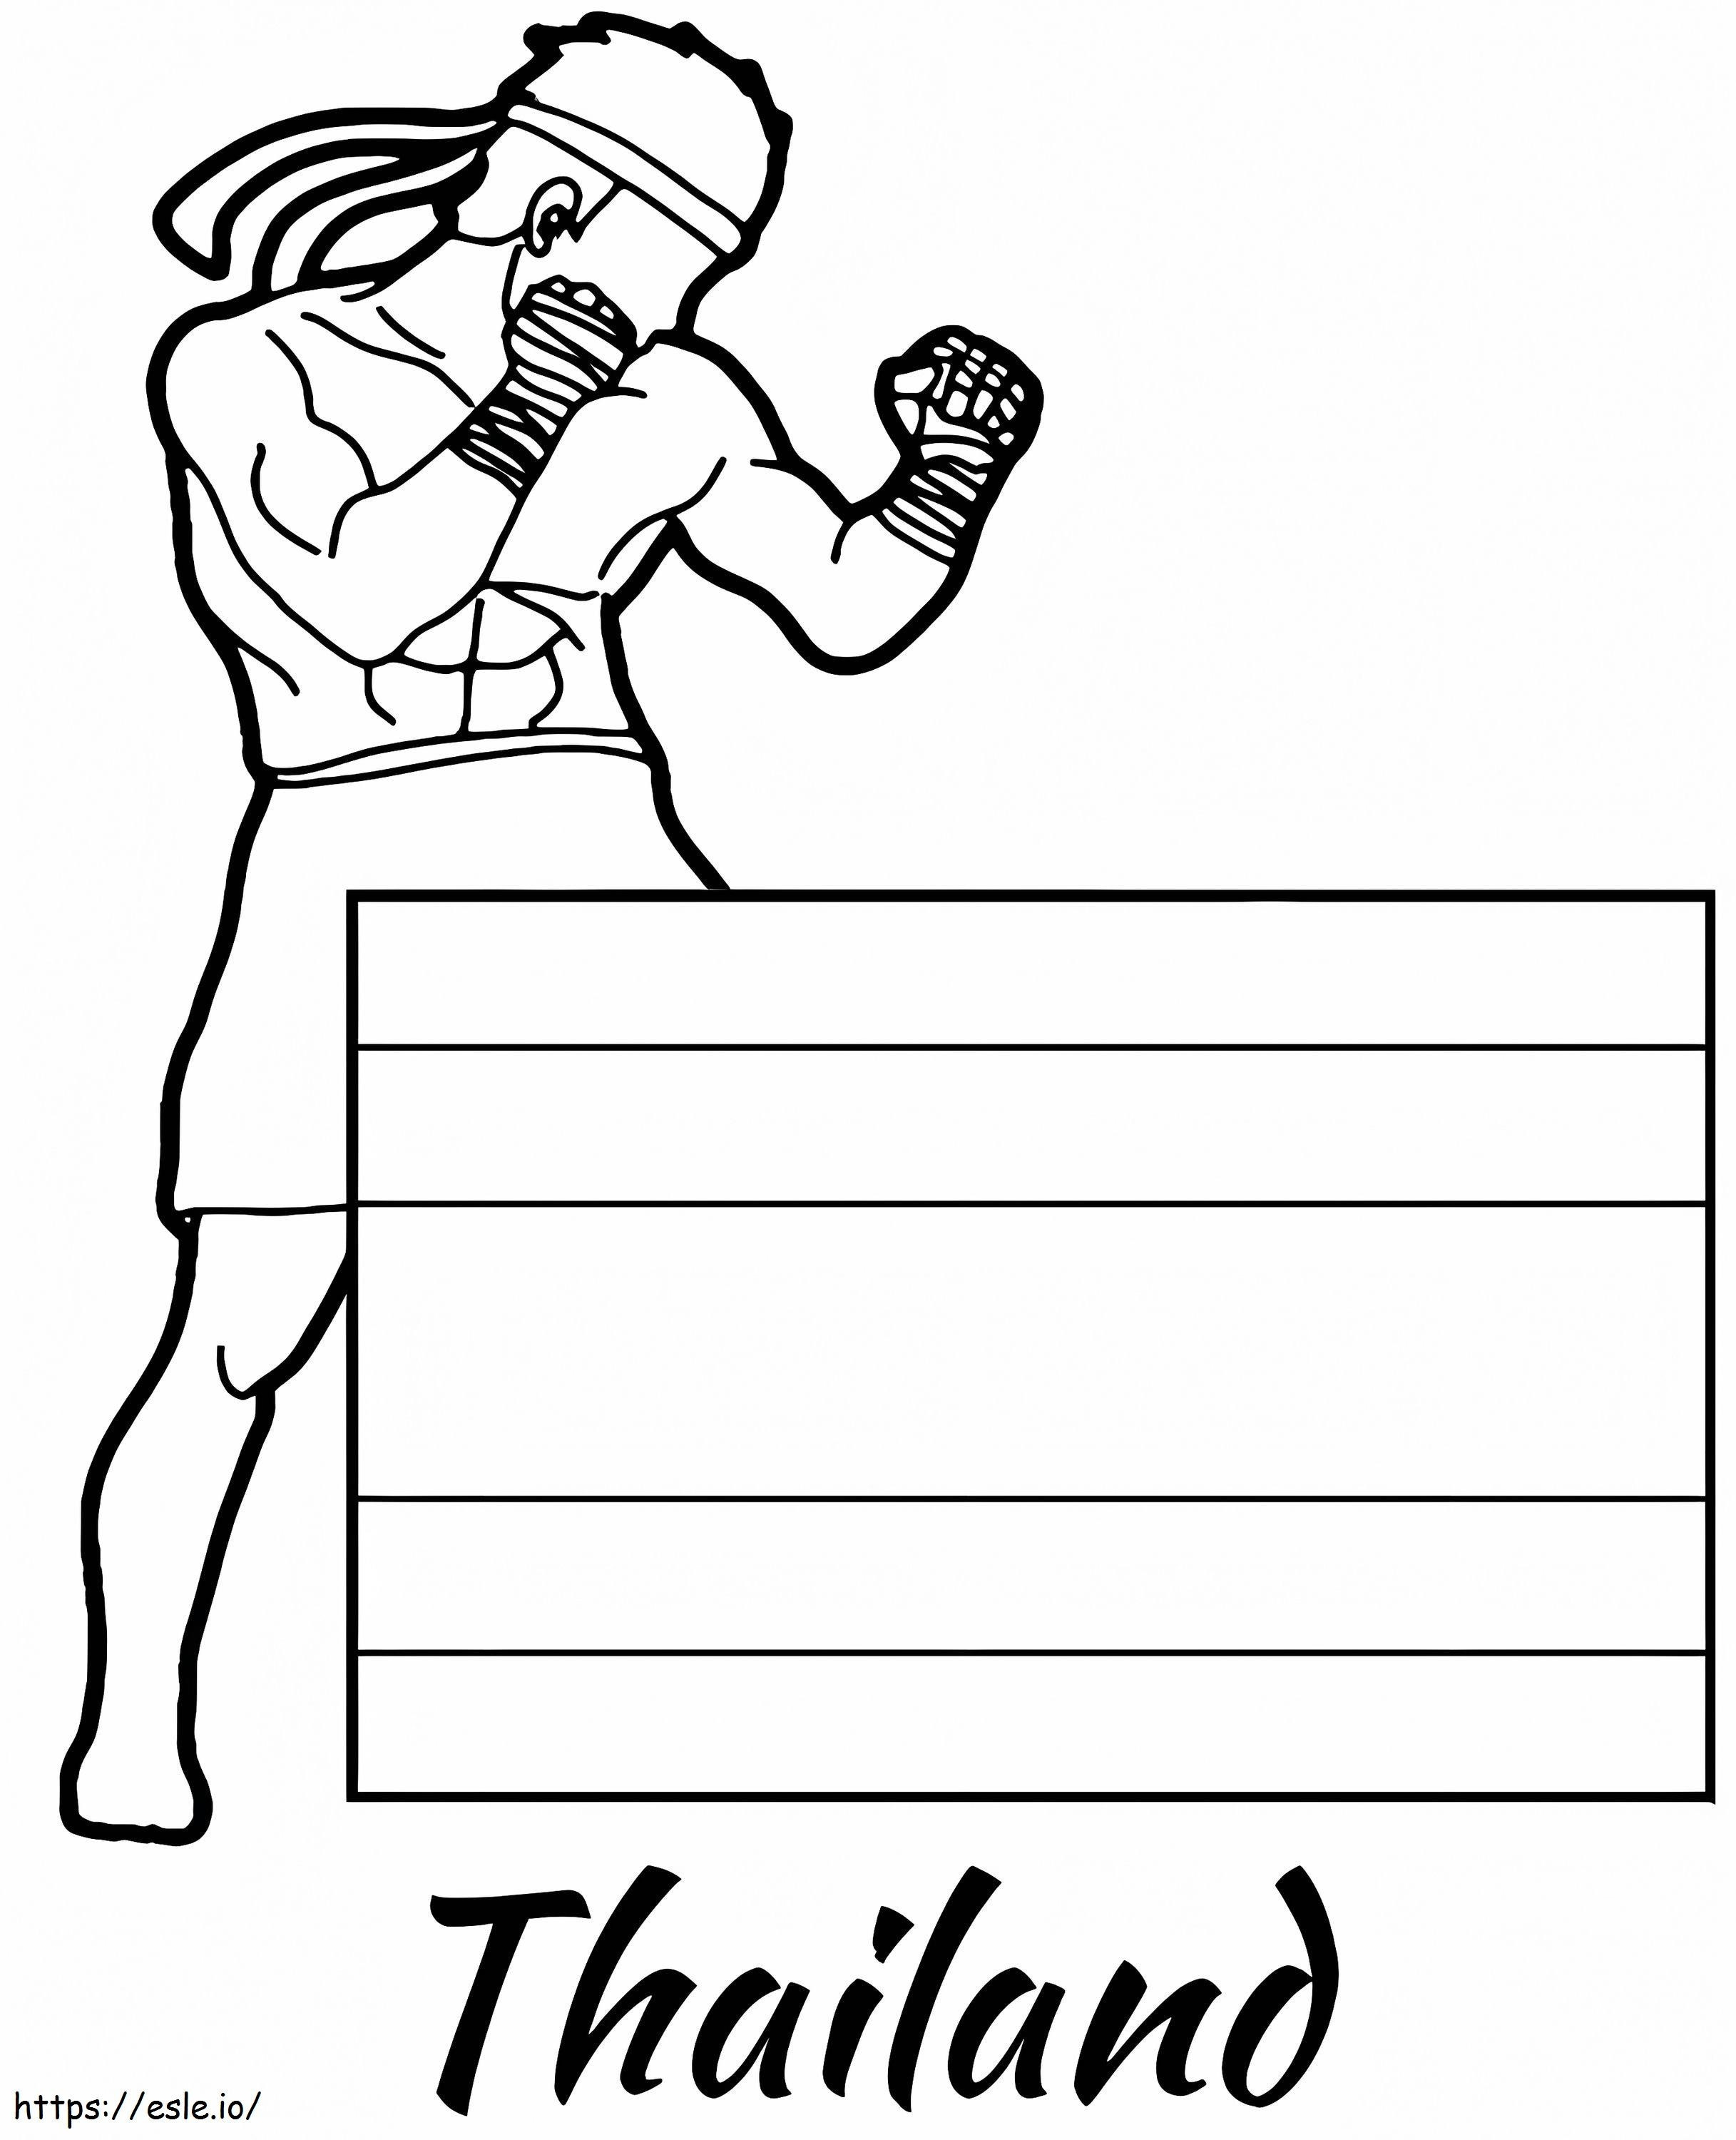 Thailand 1 coloring page